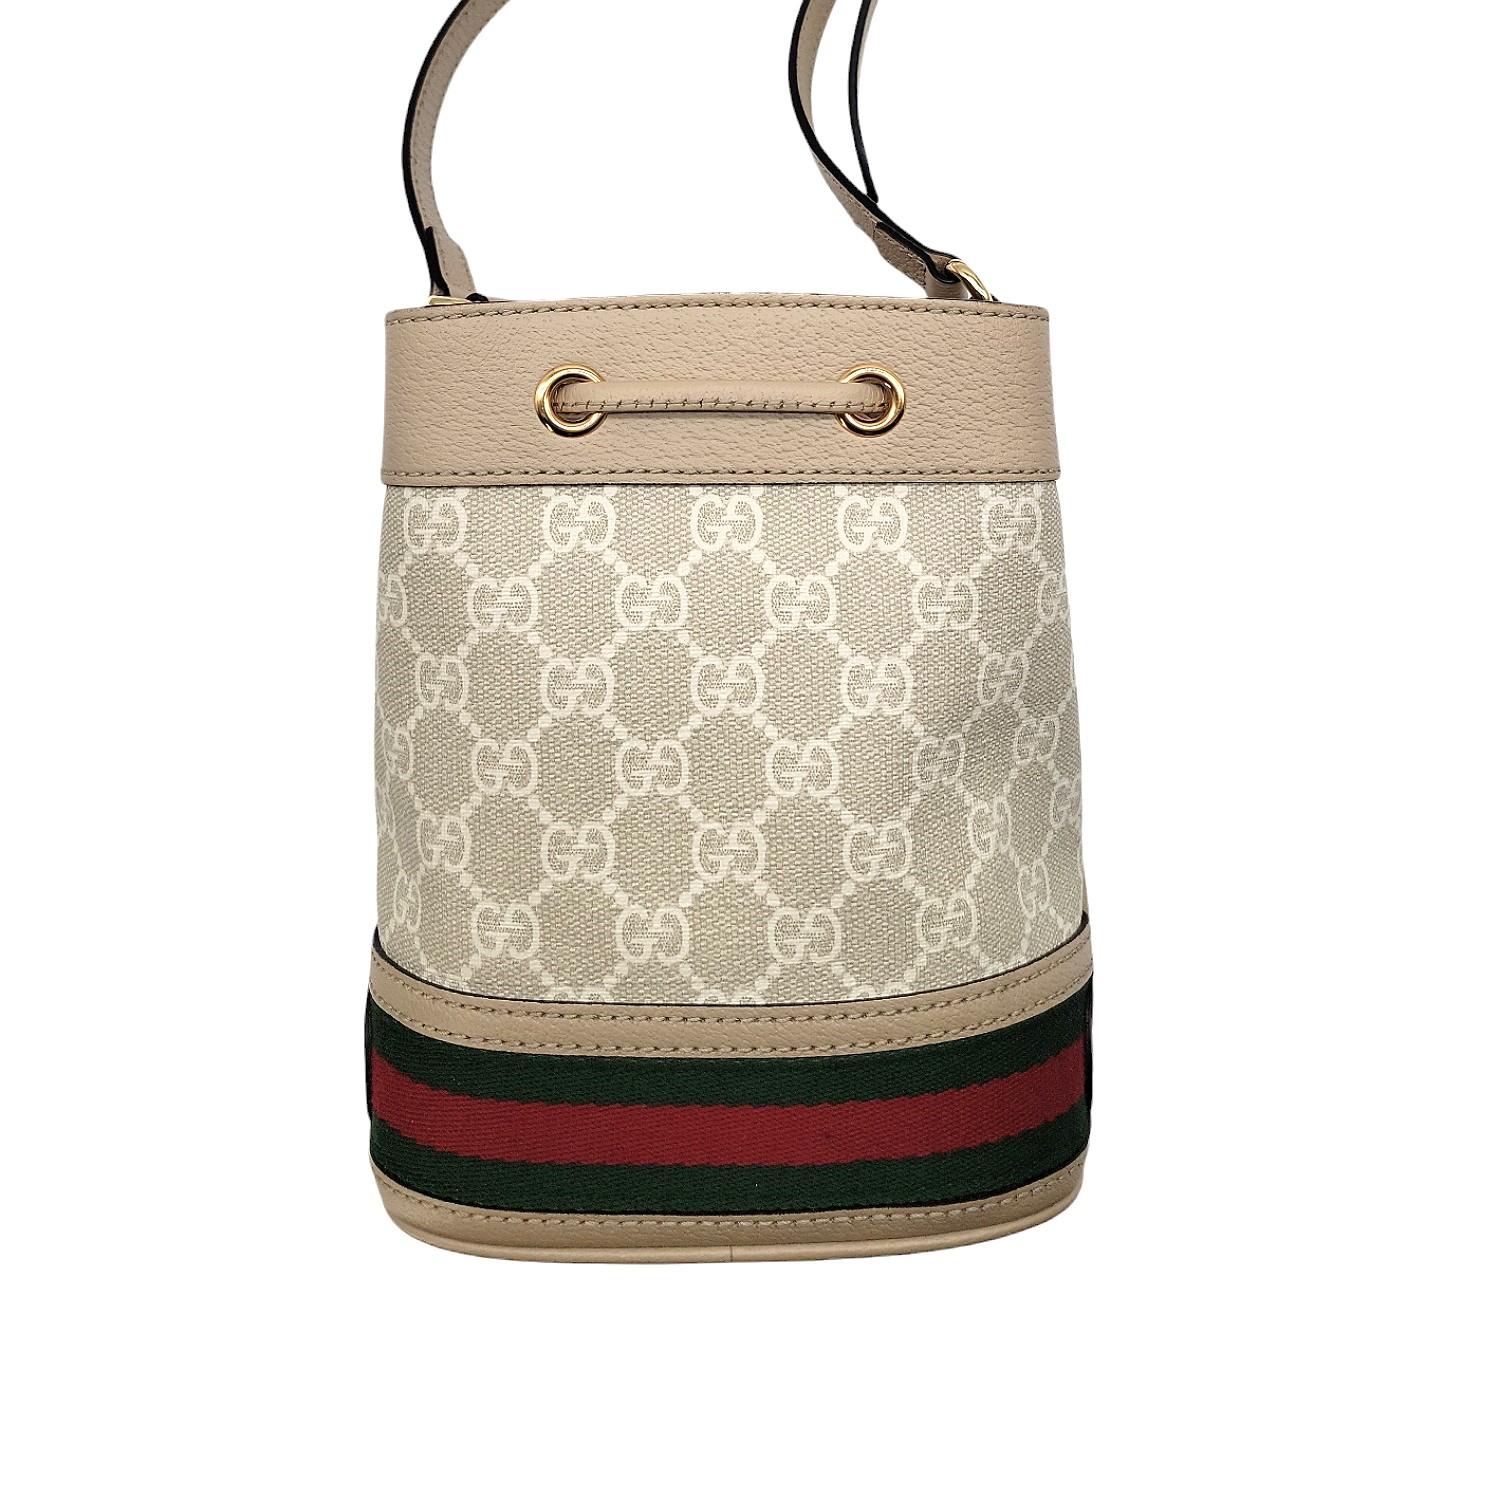 Gucci GG Supreme Mini Ophidia Bucket Bag In Excellent Condition For Sale In Scottsdale, AZ